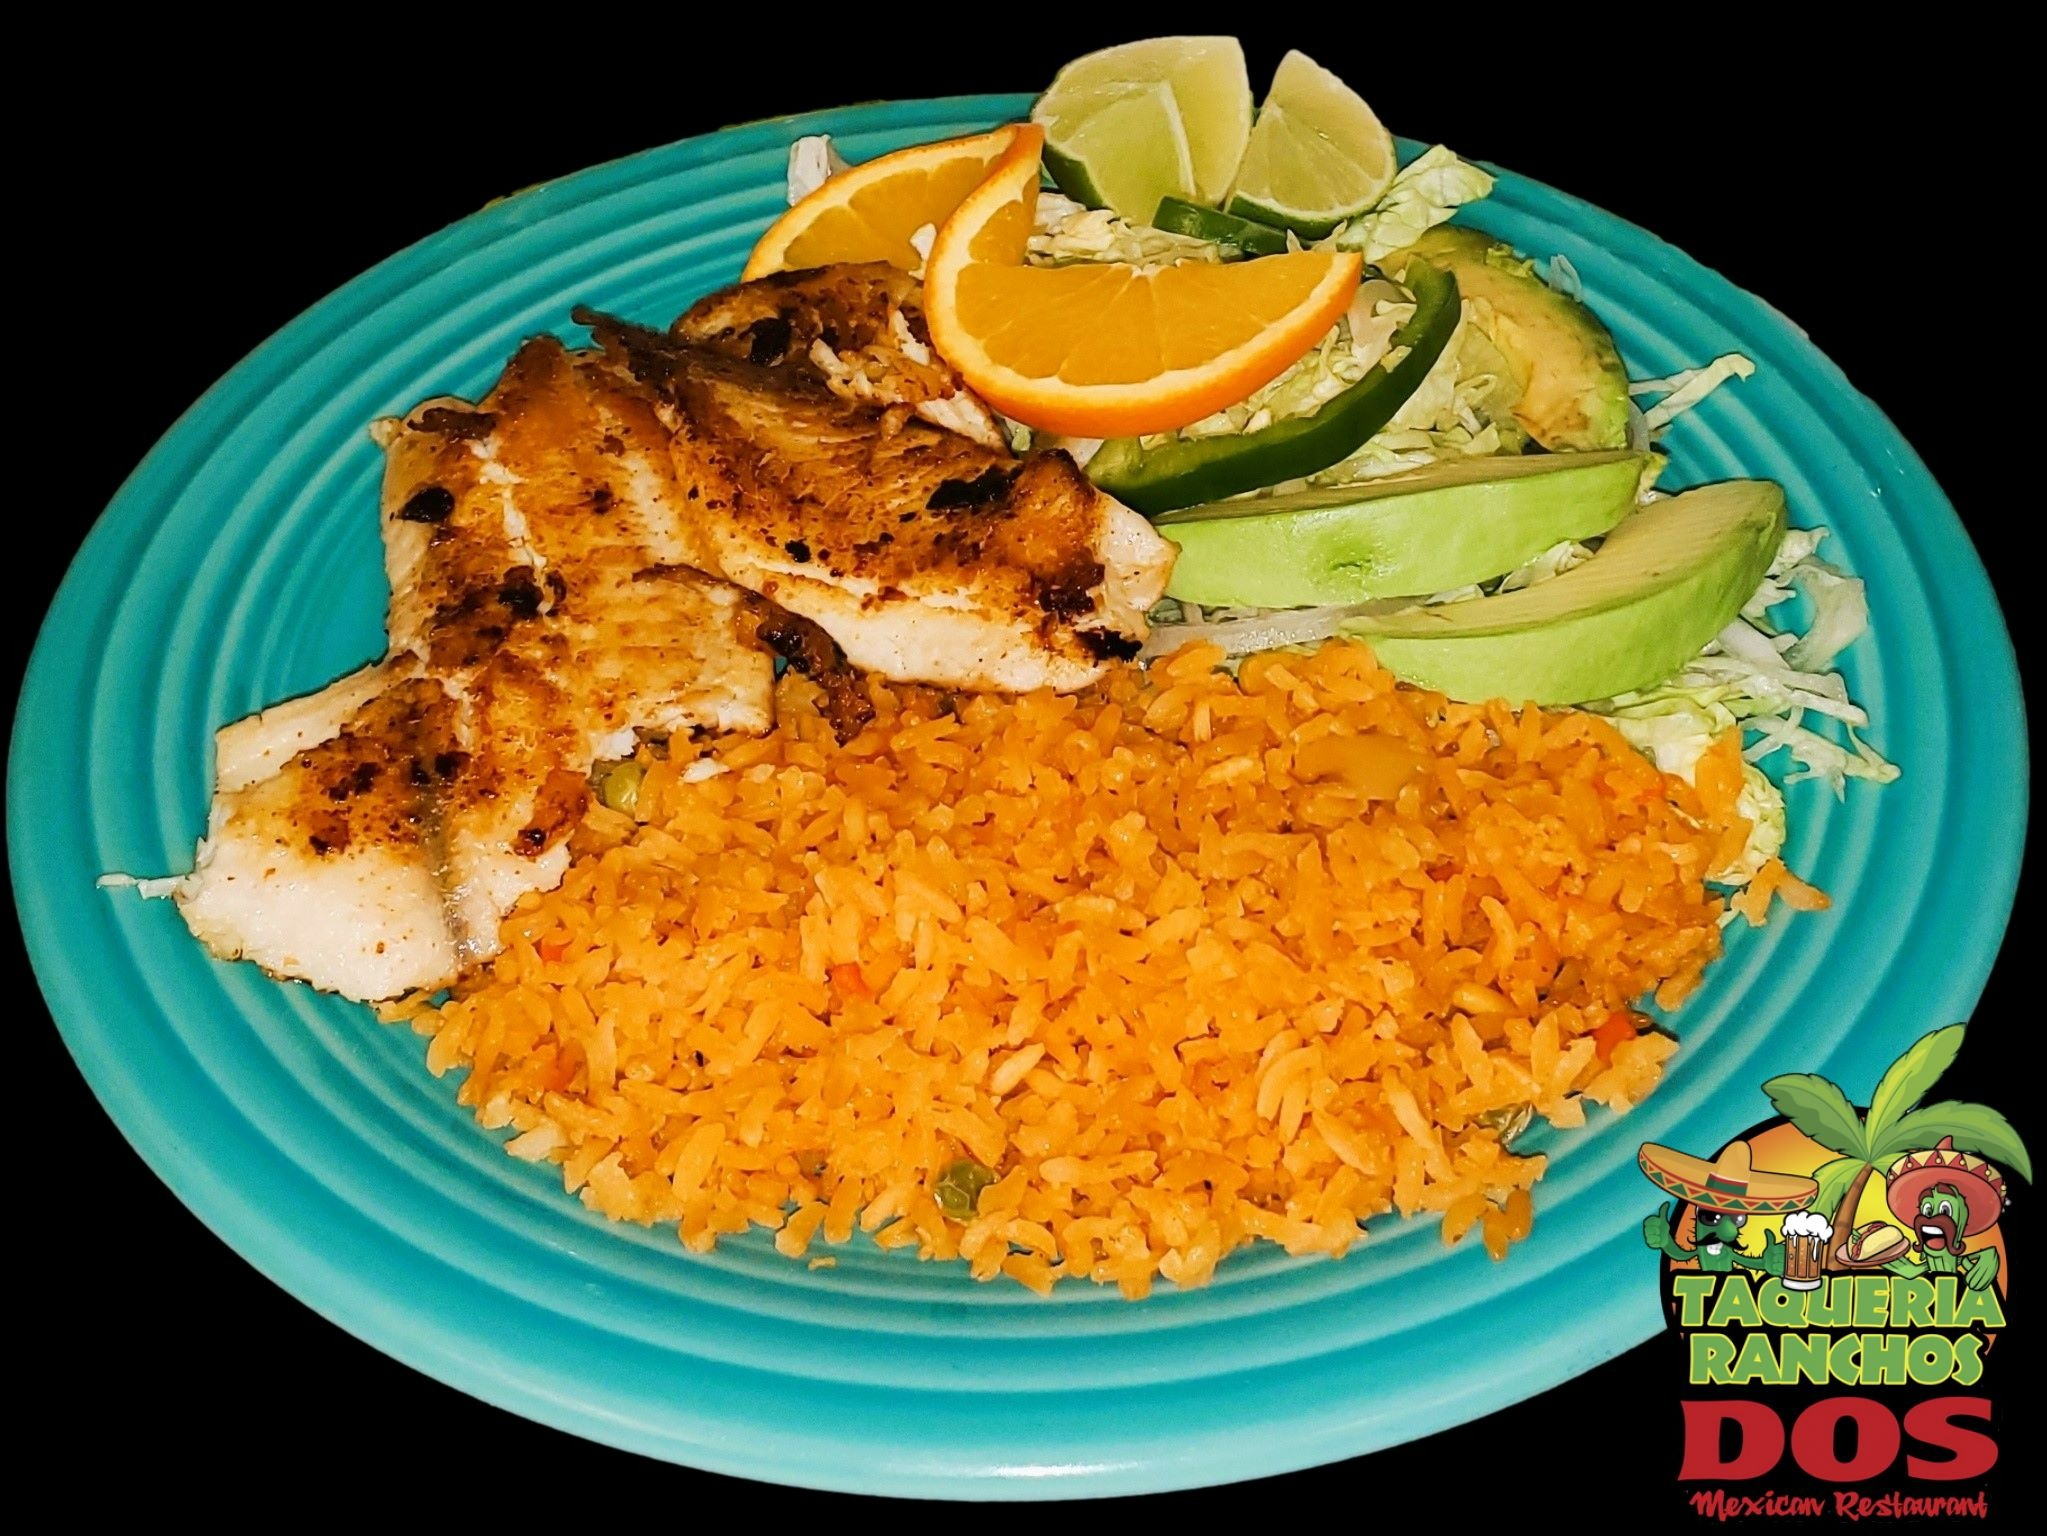 Seafood Dinners at Taqueria Ranchos Dos in Buffalo New York